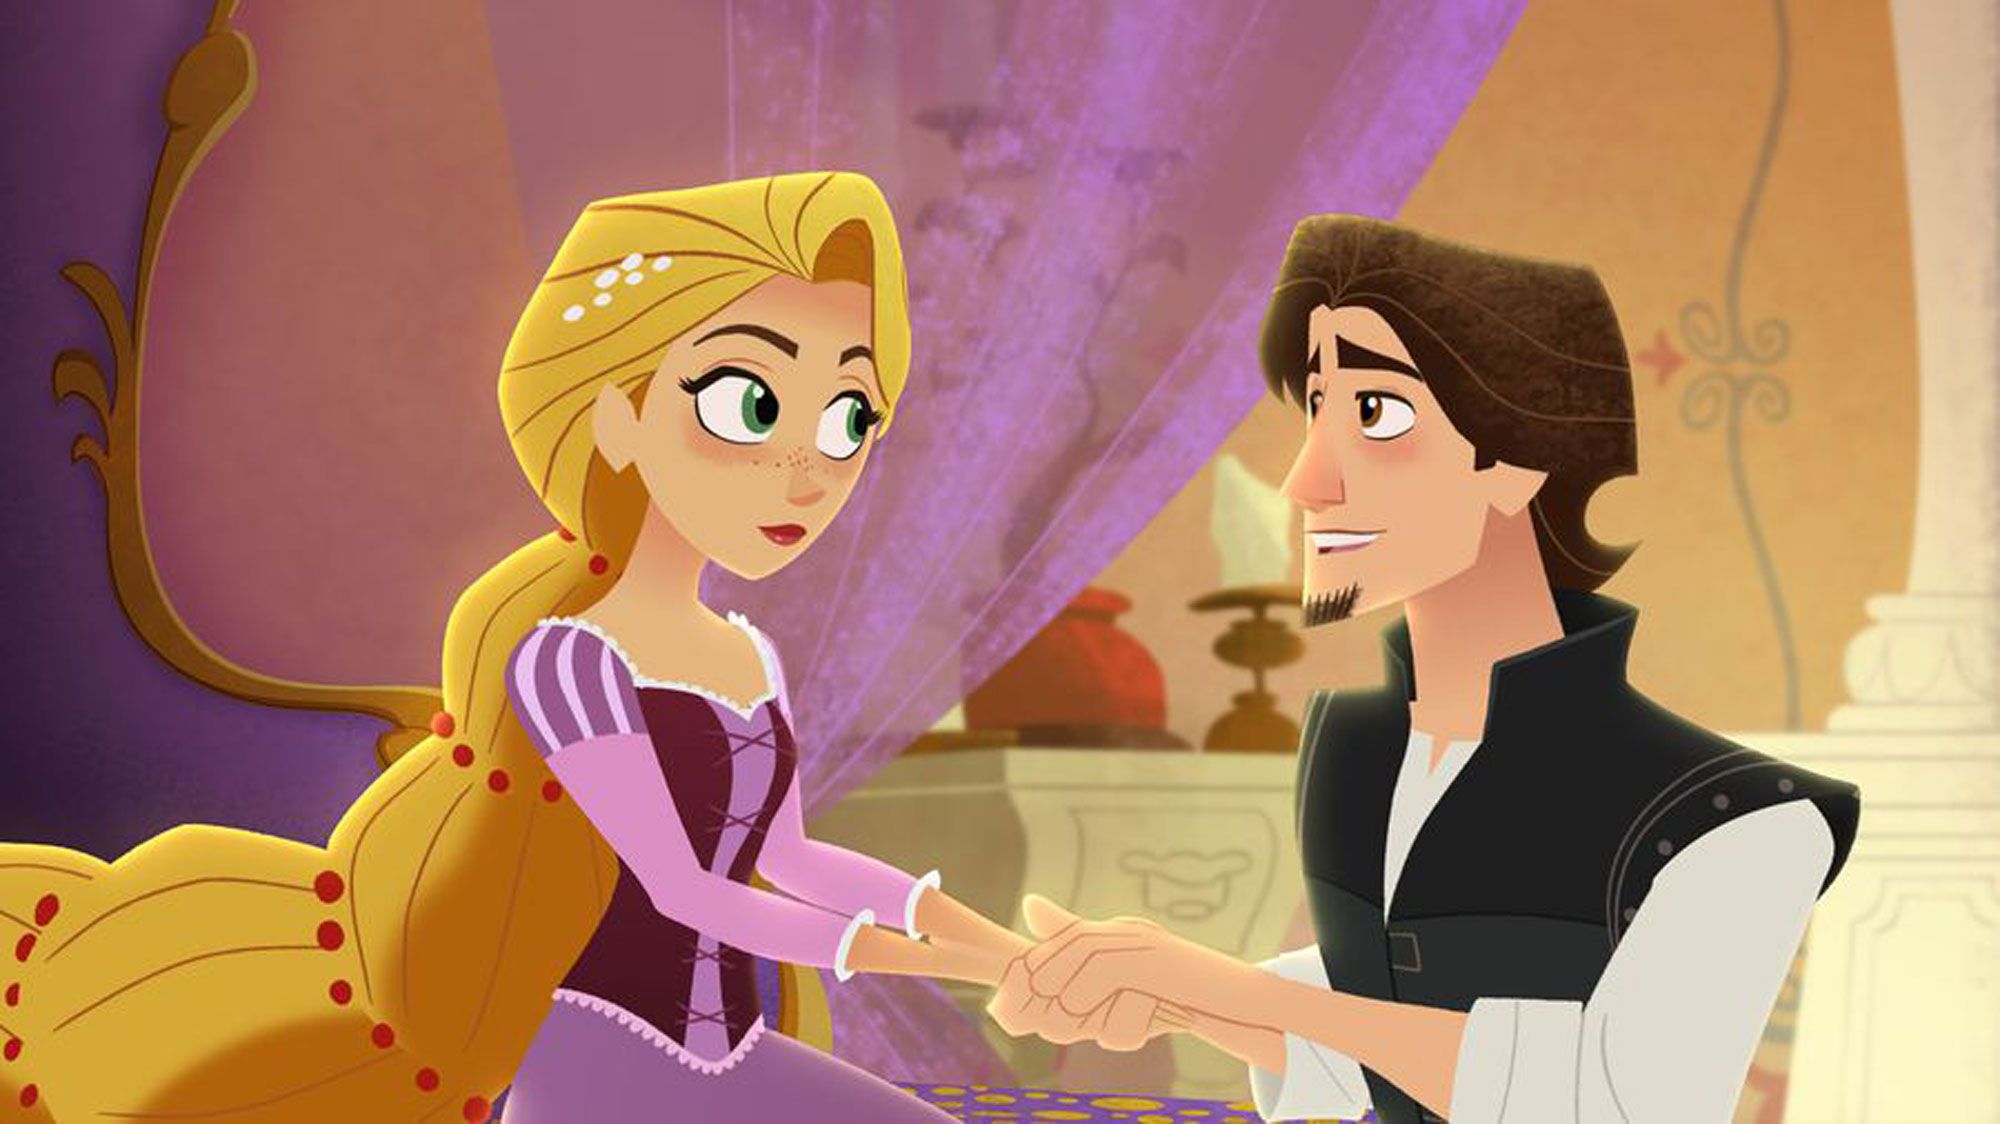 Disney's Tangled TV show gets a third season and a name change